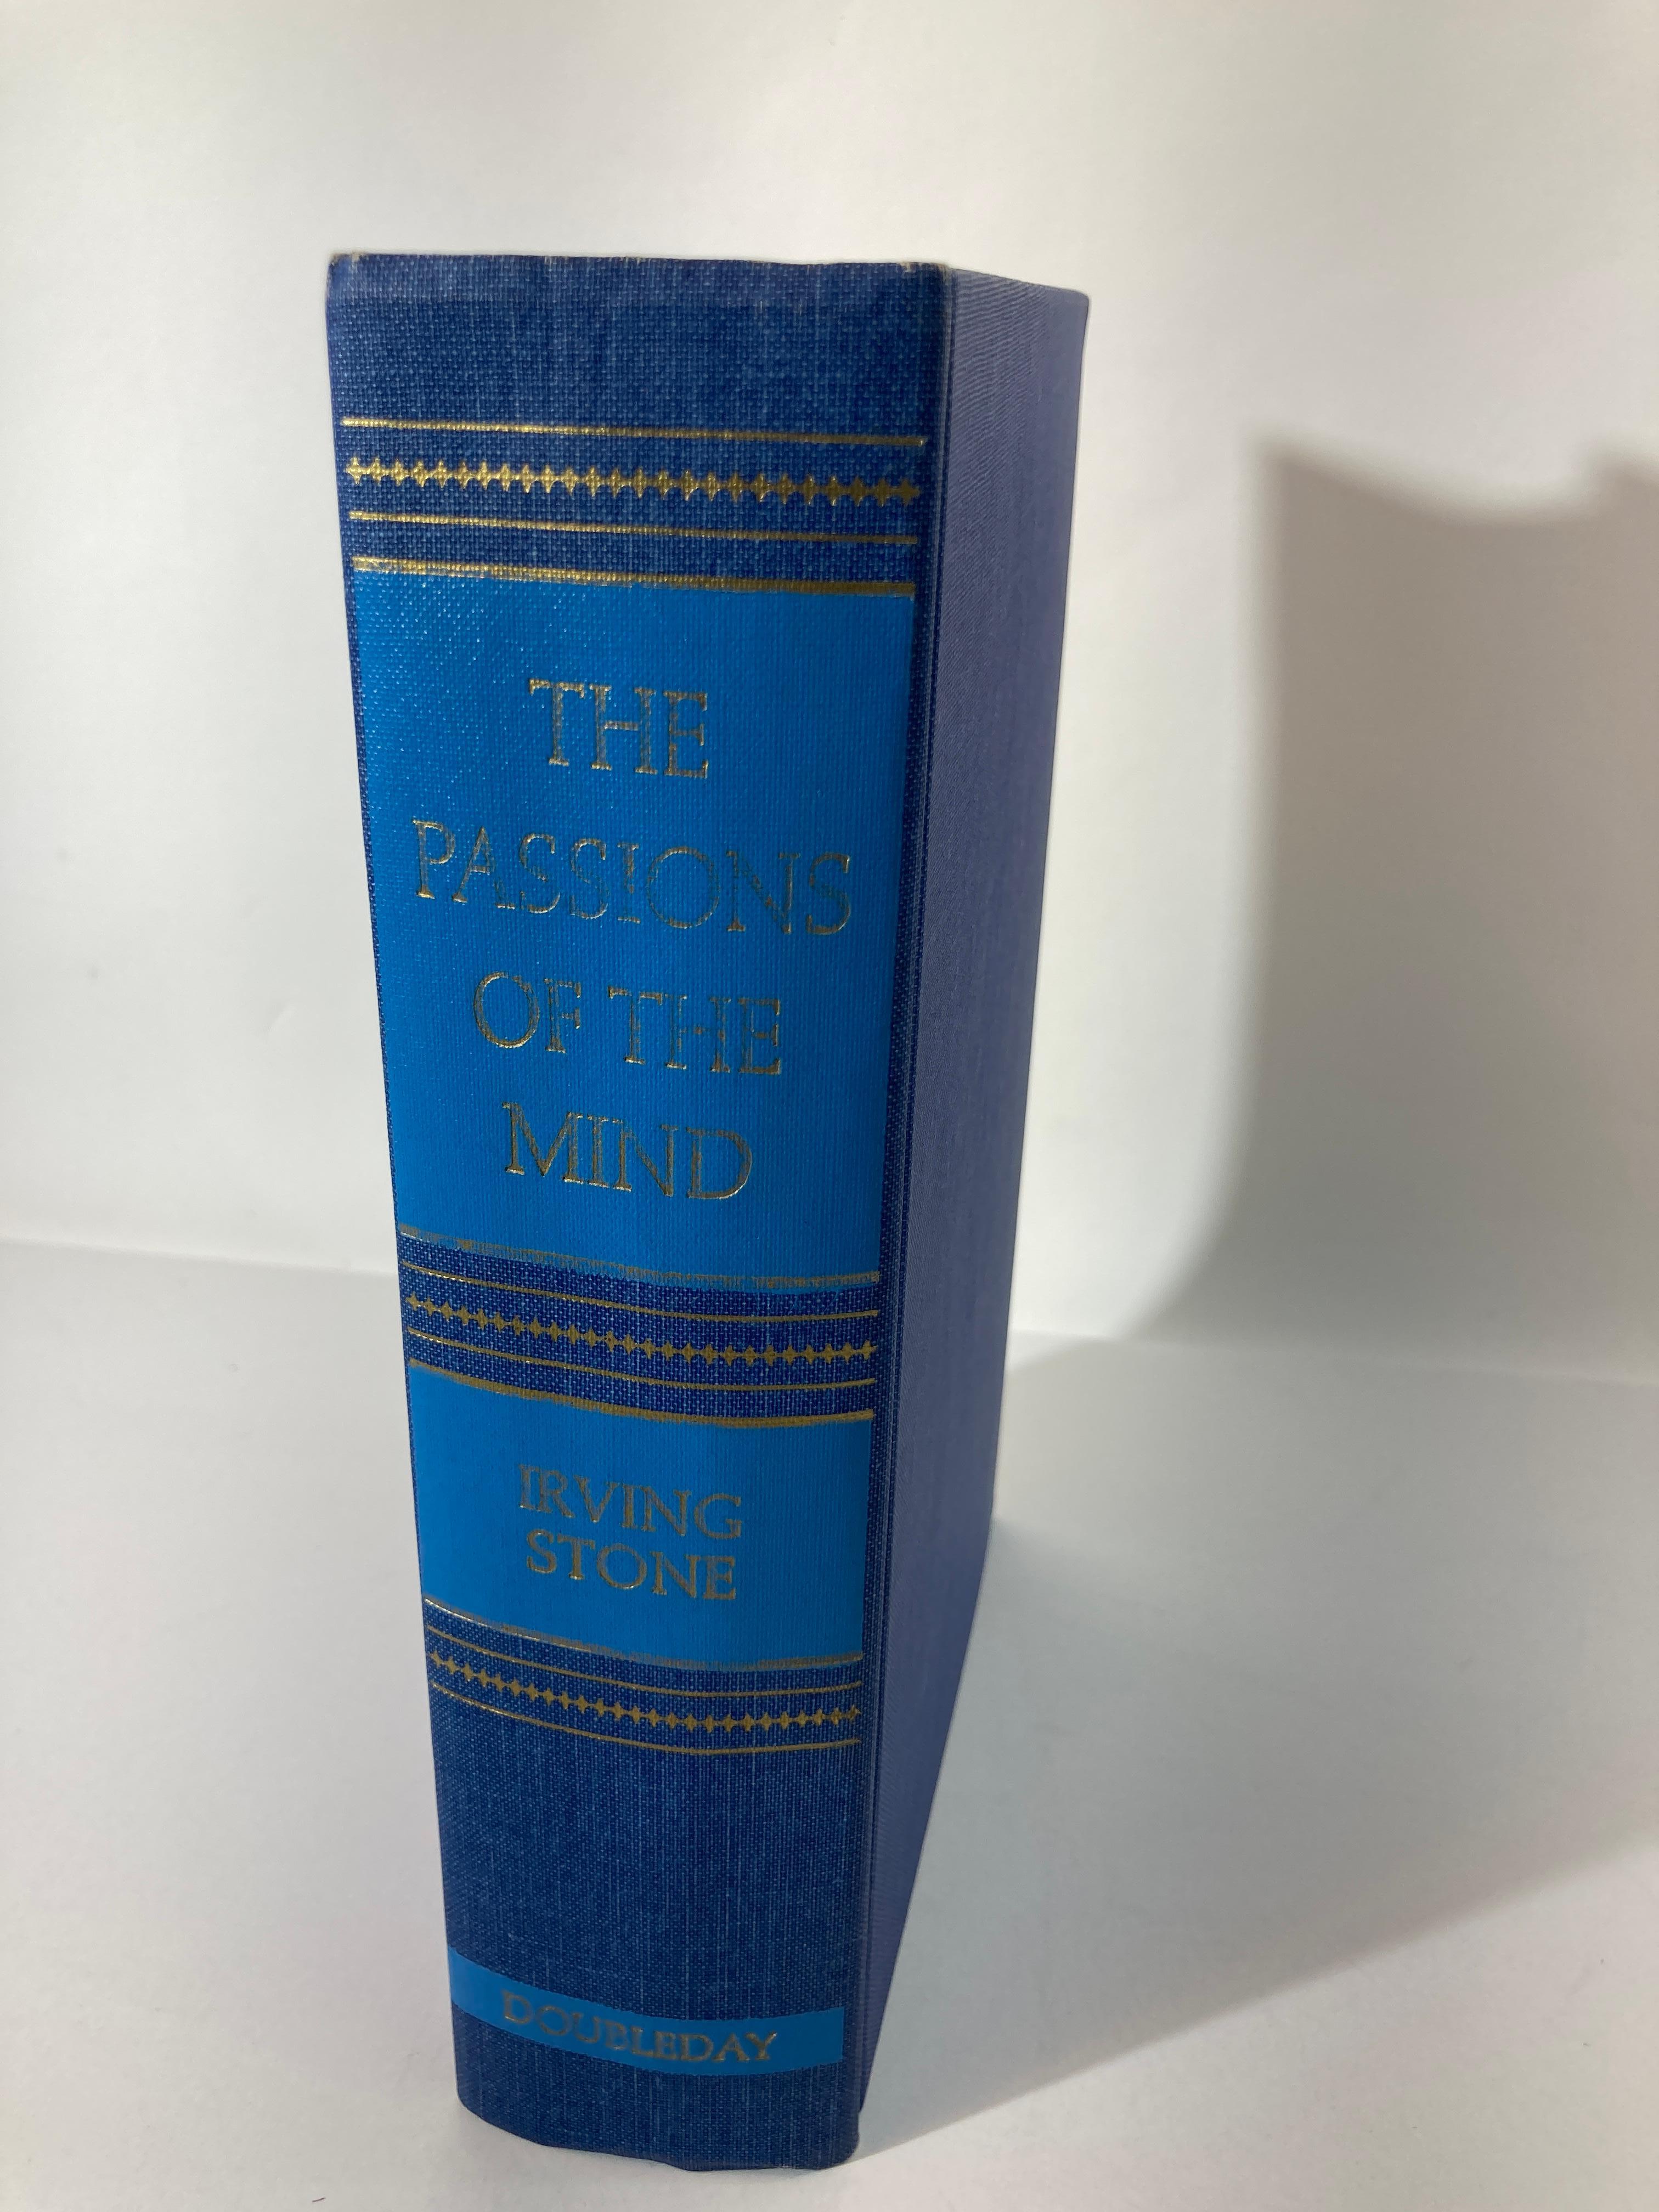 The Passions of the Mind a novel of Sigmund Freud by Irving Stone.
Vintage book, 1st edition: 1971
Biography of Sigmund Freud
In the 1880's, Vienna was Europe's glamour capital. It was in that brilliant city that Sigmund Freud began his long